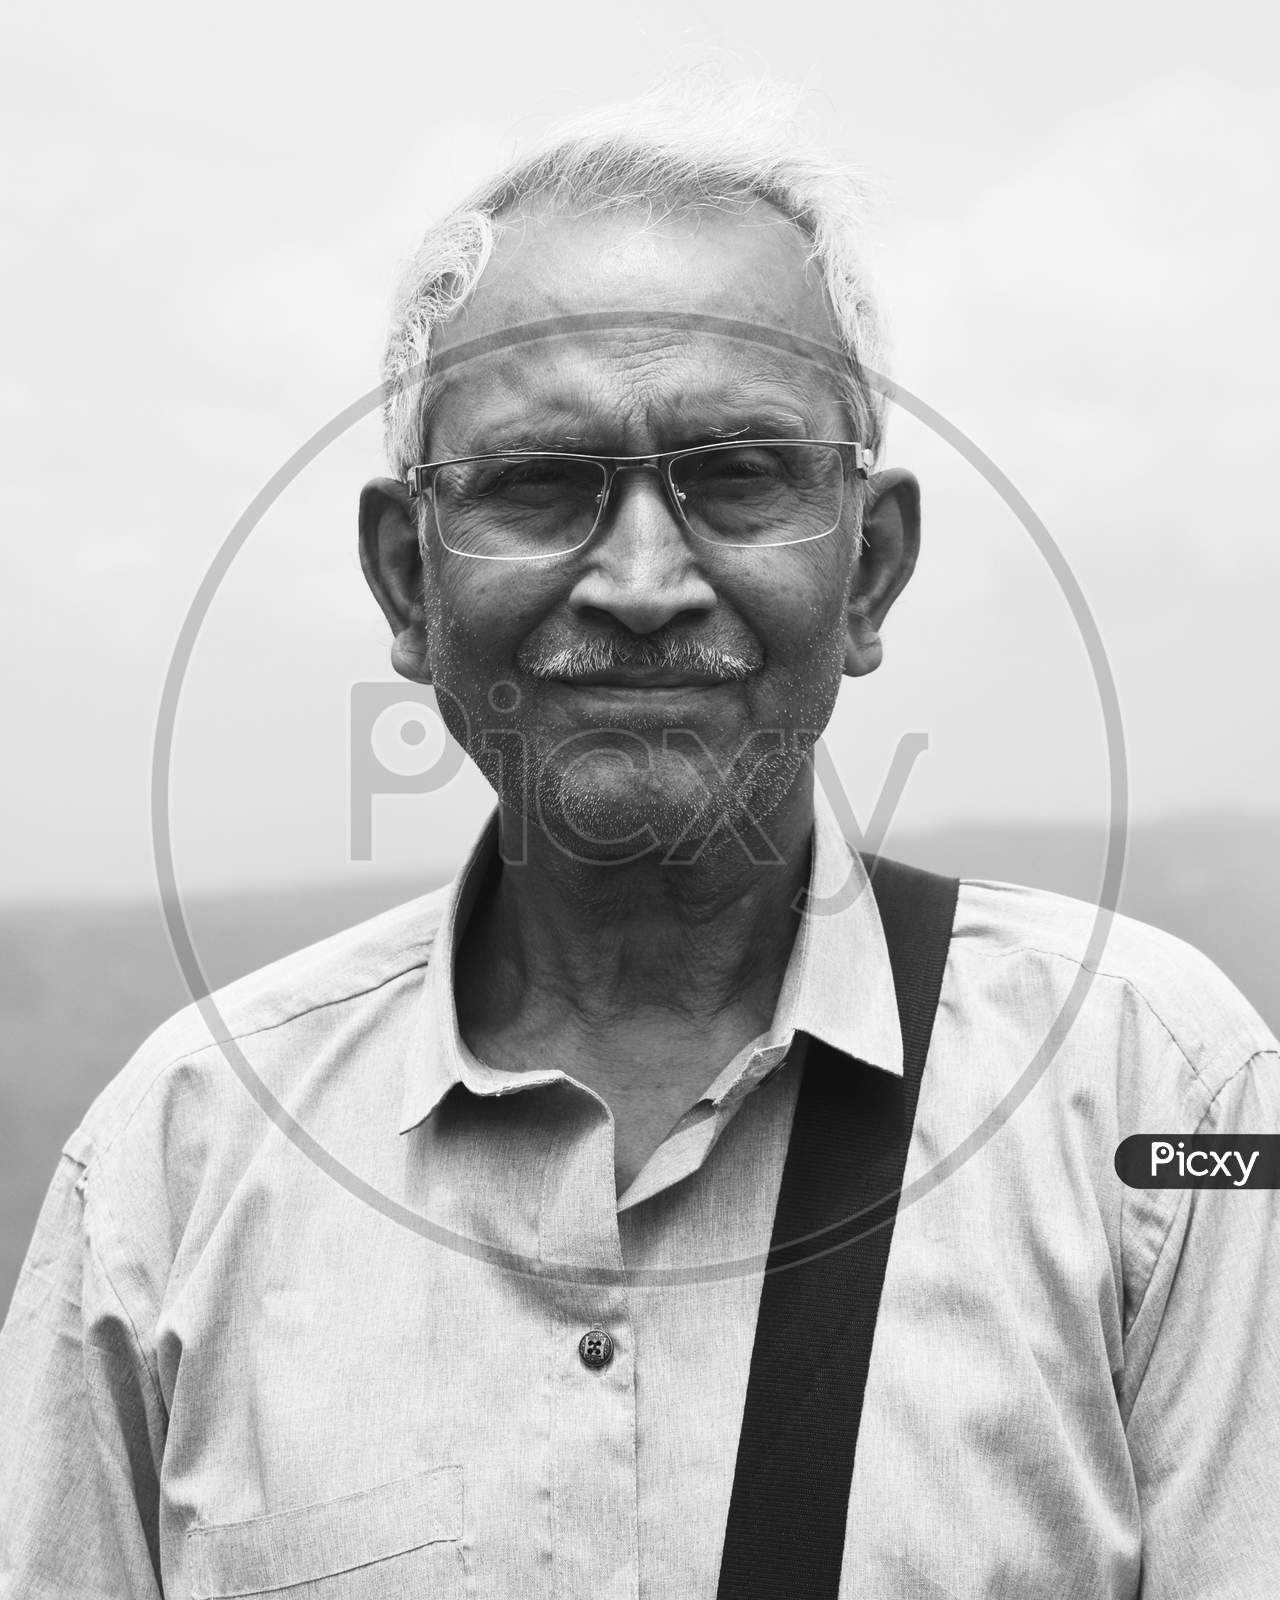 Monochrome Portrait Of An Old Man, Wearing Spectacles And Blue Shirt, Standing Alone In Nature A Blurry Mountain Background. The Elder Person With Side Bag On His Shoulder, Looking Towards The Camera.